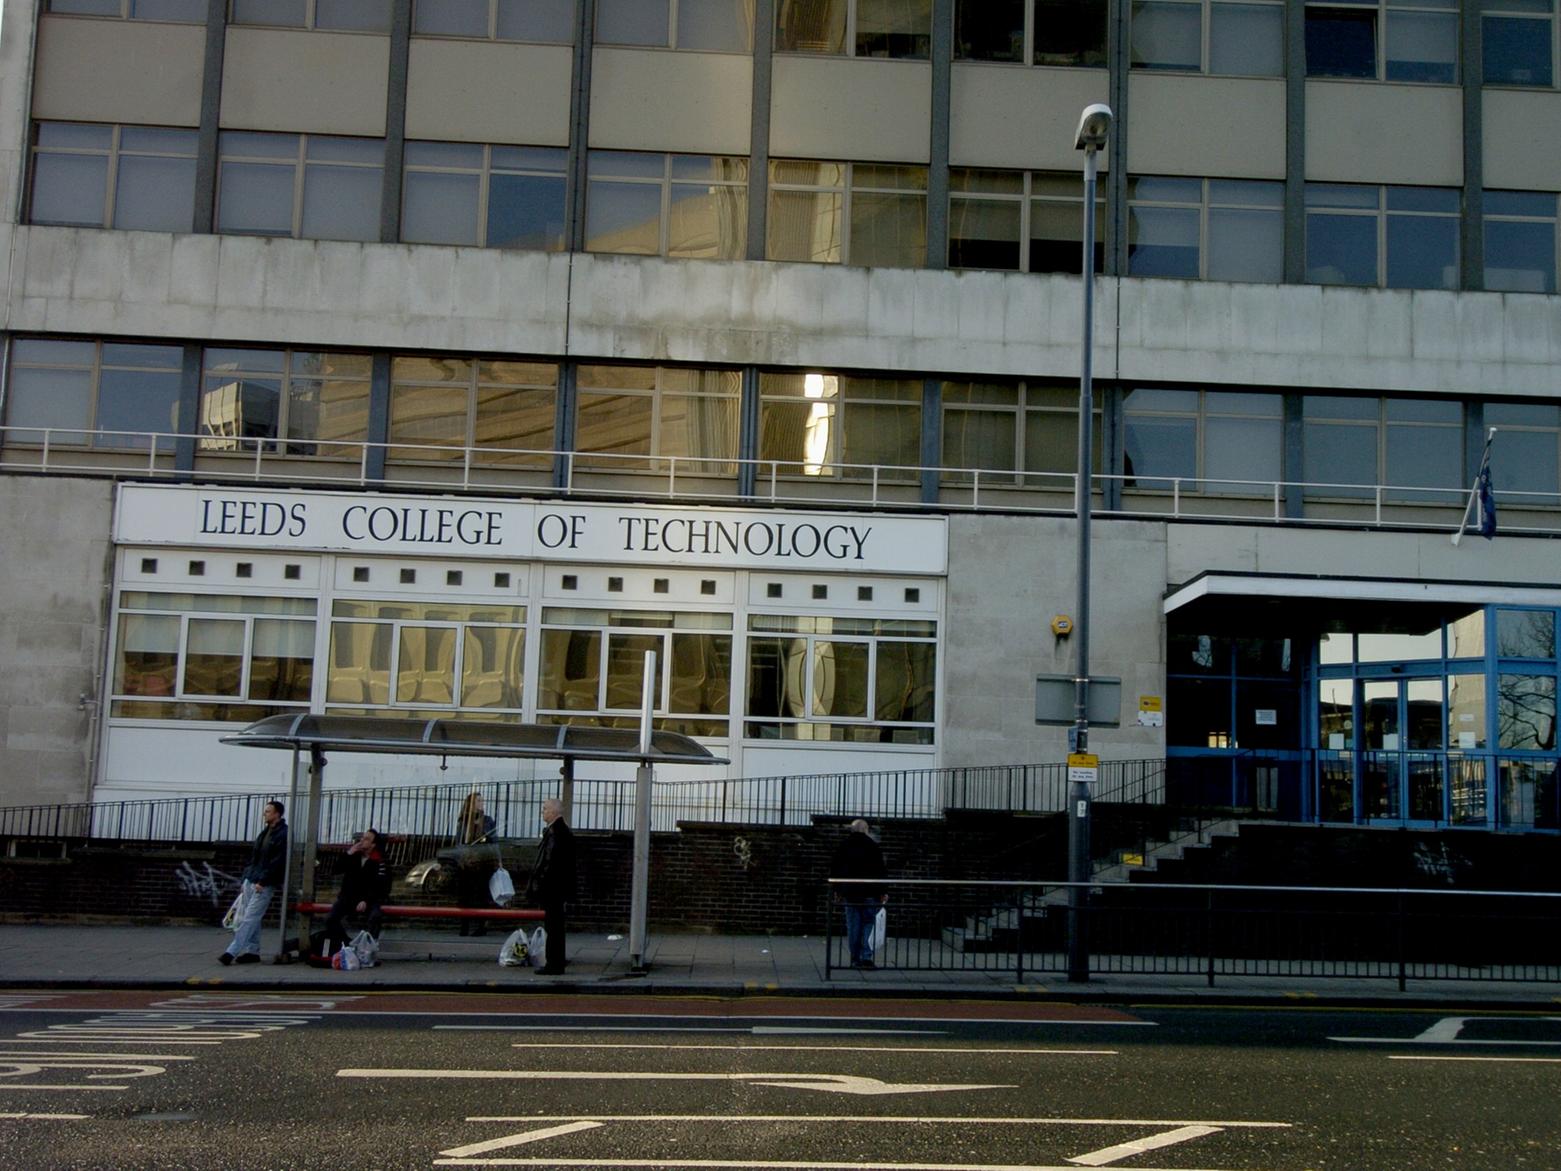 Remember students rushing in and out of here back in the day? The Woodhouse Lane building is due to be demolished and replaced with 20-storeys of student accommodation.